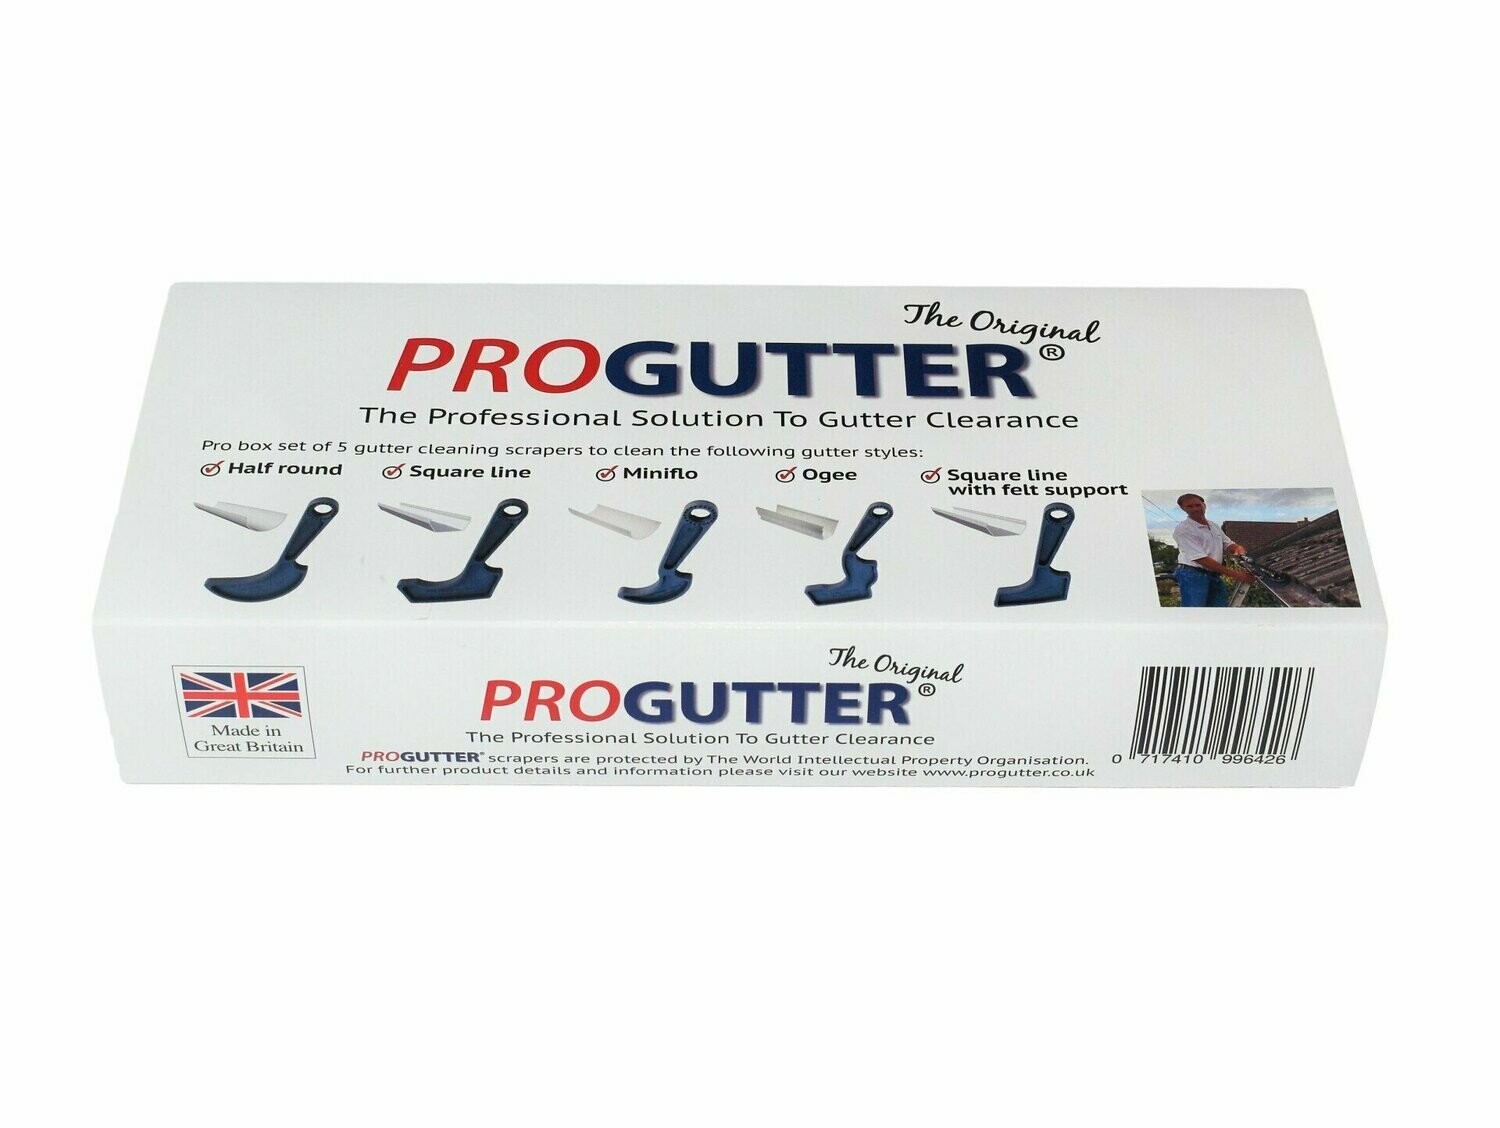 Box set of 5 gutter cleaning scrapers